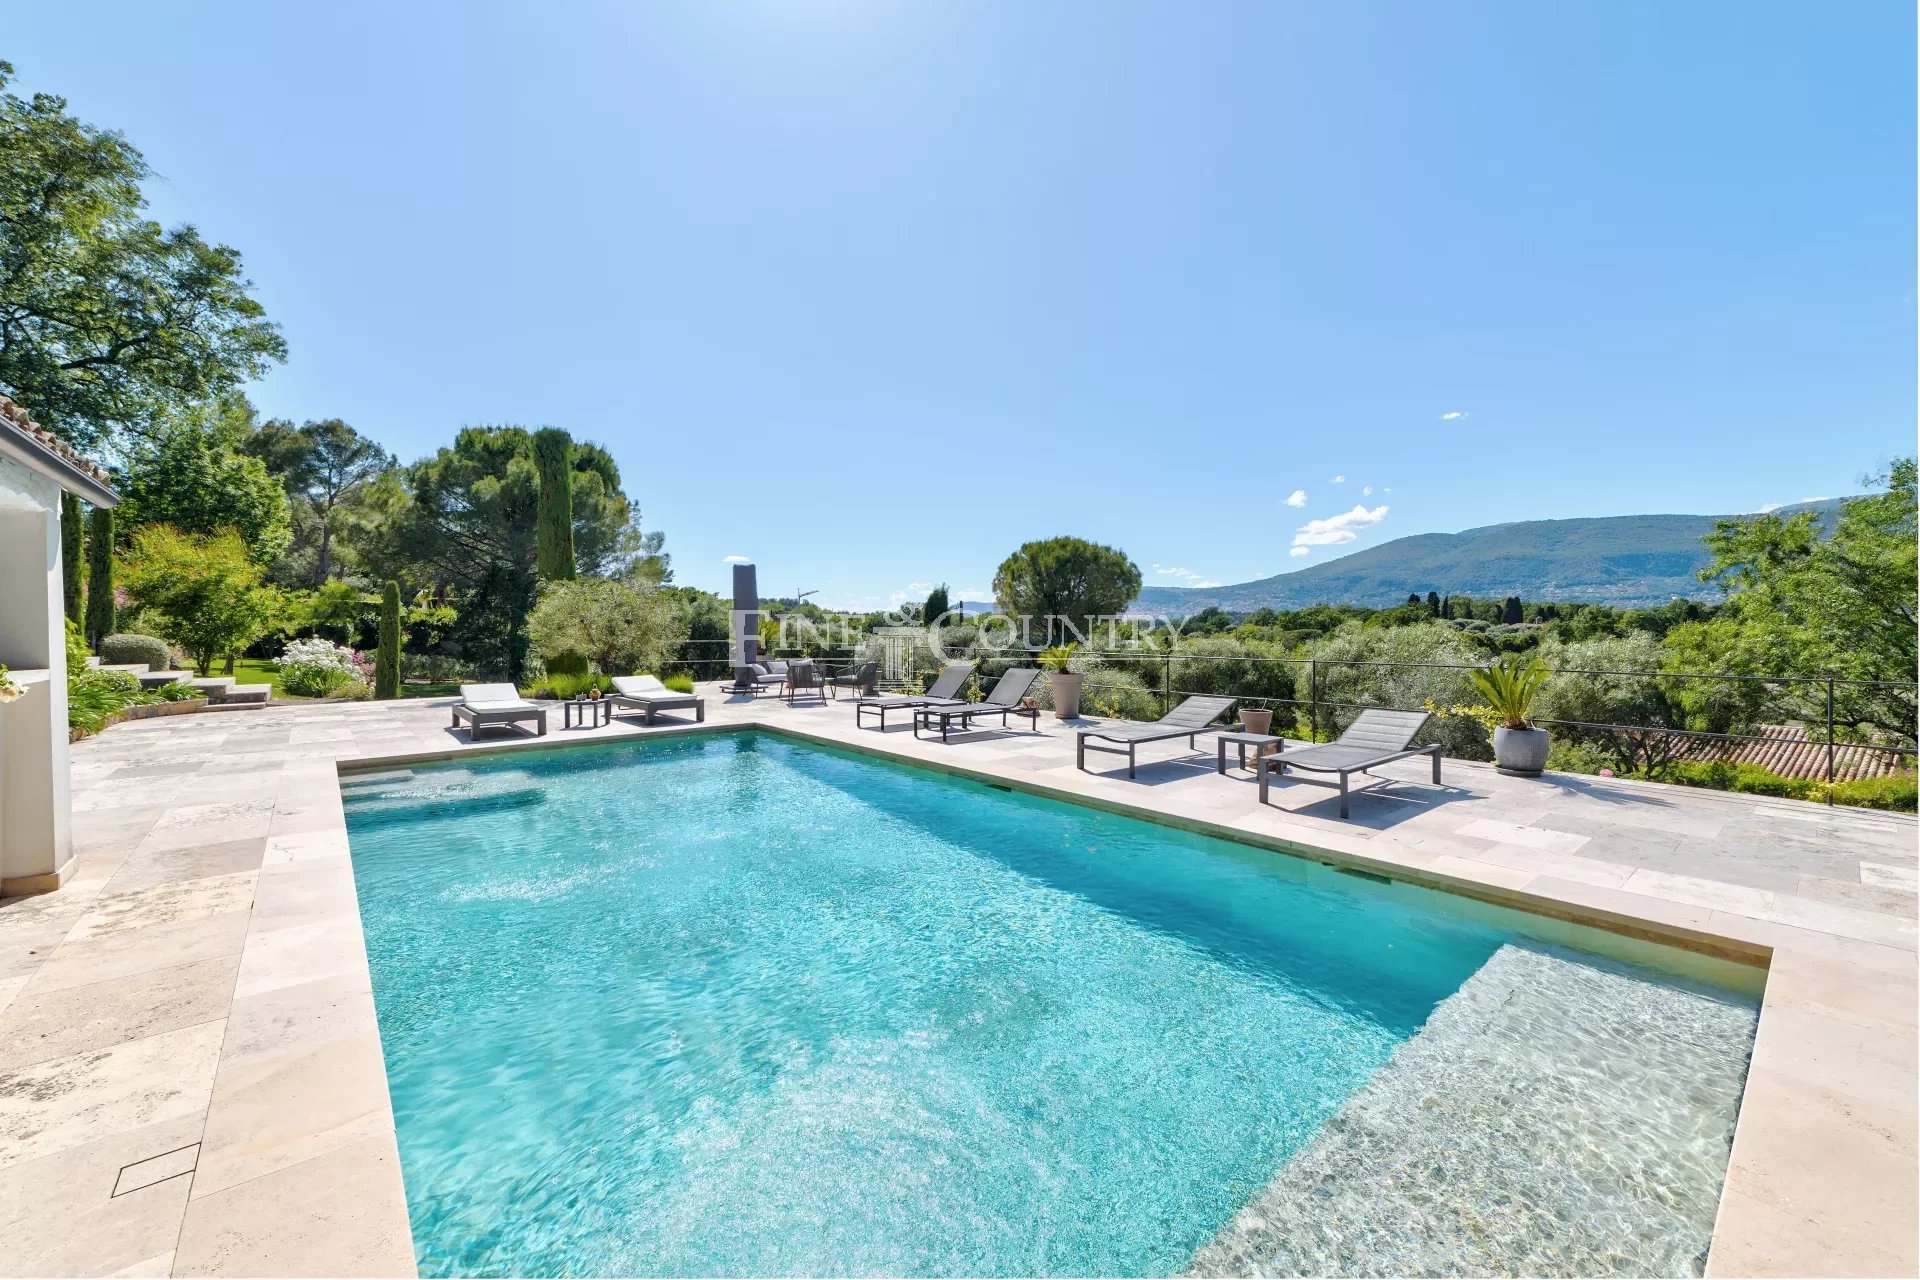 Villa for sale close to Valbonne with panoramic views